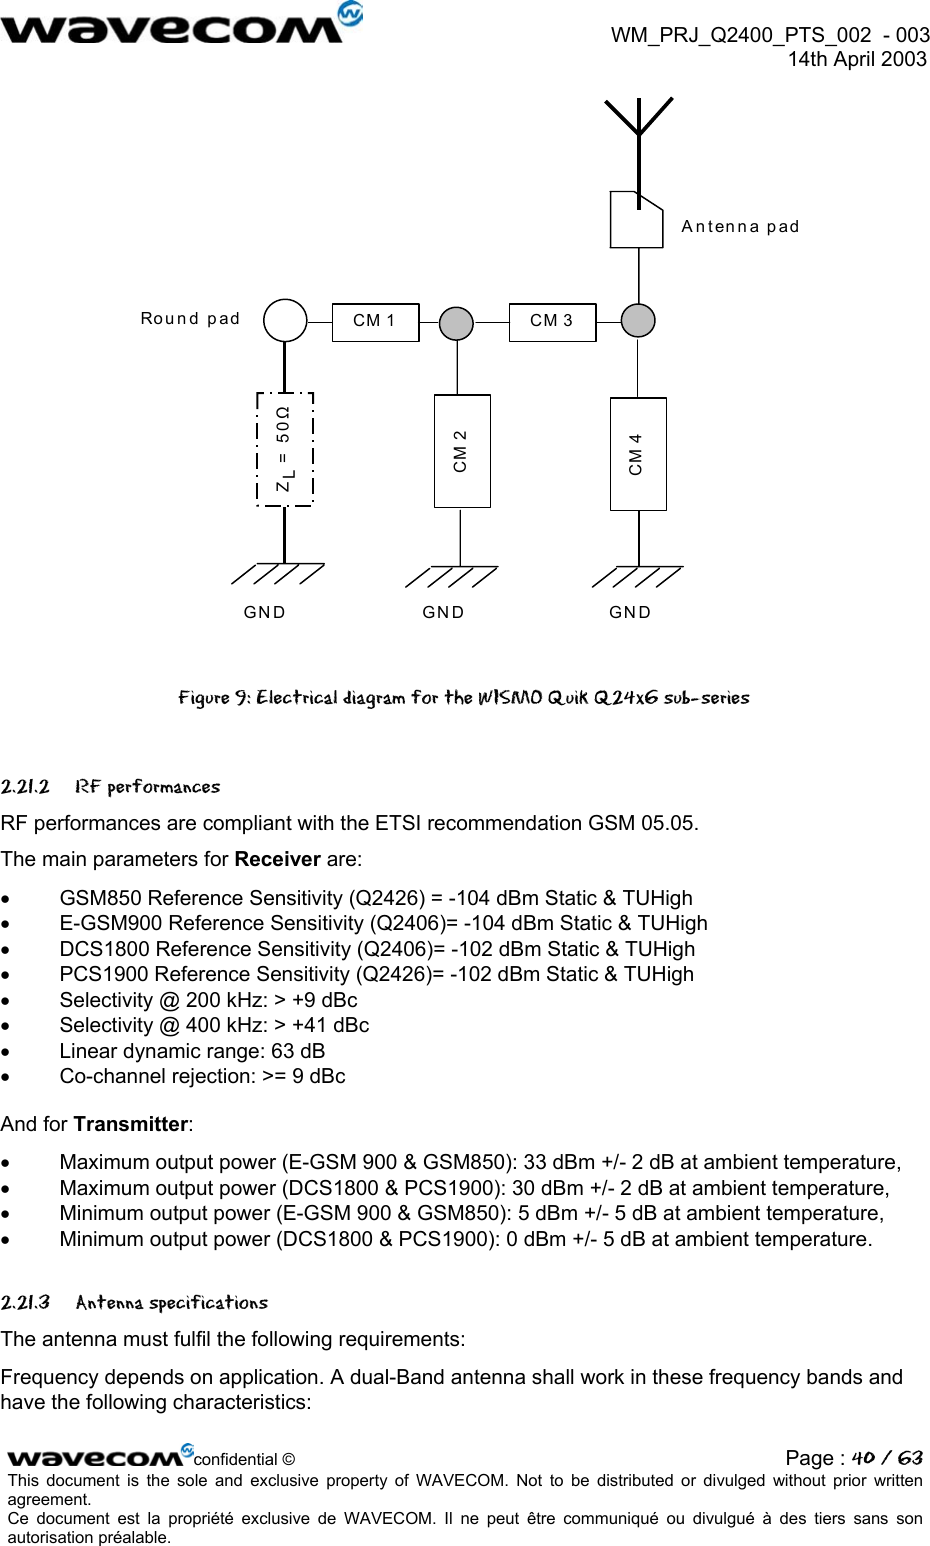  WM_PRJ_Q2400_PTS_002  - 003  14th April 2003    Antenna pad GND GND GNDCM 1 CM 3Round padCM 2 CM 4 ZL = 50Ω   Figure 9: Electrical diagram for the WISMO Quik Q24x6 sub-series  2.21.2 RF performances RF performances are compliant with the ETSI recommendation GSM 05.05. The main parameters for Receiver are:  •  GSM850 Reference Sensitivity (Q2426) = -104 dBm Static &amp; TUHigh •  E-GSM900 Reference Sensitivity (Q2406)= -104 dBm Static &amp; TUHigh •  DCS1800 Reference Sensitivity (Q2406)= -102 dBm Static &amp; TUHigh •  PCS1900 Reference Sensitivity (Q2426)= -102 dBm Static &amp; TUHigh •  Selectivity @ 200 kHz: &gt; +9 dBc  •  Selectivity @ 400 kHz: &gt; +41 dBc •  Linear dynamic range: 63 dB •  Co-channel rejection: &gt;= 9 dBc  And for Transmitter: •  Maximum output power (E-GSM 900 &amp; GSM850): 33 dBm +/- 2 dB at ambient temperature, •  Maximum output power (DCS1800 &amp; PCS1900): 30 dBm +/- 2 dB at ambient temperature, •  Minimum output power (E-GSM 900 &amp; GSM850): 5 dBm +/- 5 dB at ambient temperature, •  Minimum output power (DCS1800 &amp; PCS1900): 0 dBm +/- 5 dB at ambient temperature. 2.21.3 Antenna specifications The antenna must fulfil the following requirements: Frequency depends on application. A dual-Band antenna shall work in these frequency bands and have the following characteristics: confidential © Page : 40 / 63This document is the sole and exclusive property of WAVECOM. Not to be distributed or divulged without prior written agreement.  Ce document est la propriété exclusive de WAVECOM. Il ne peut être communiqué ou divulgué à des tiers sans son autorisation préalable.  